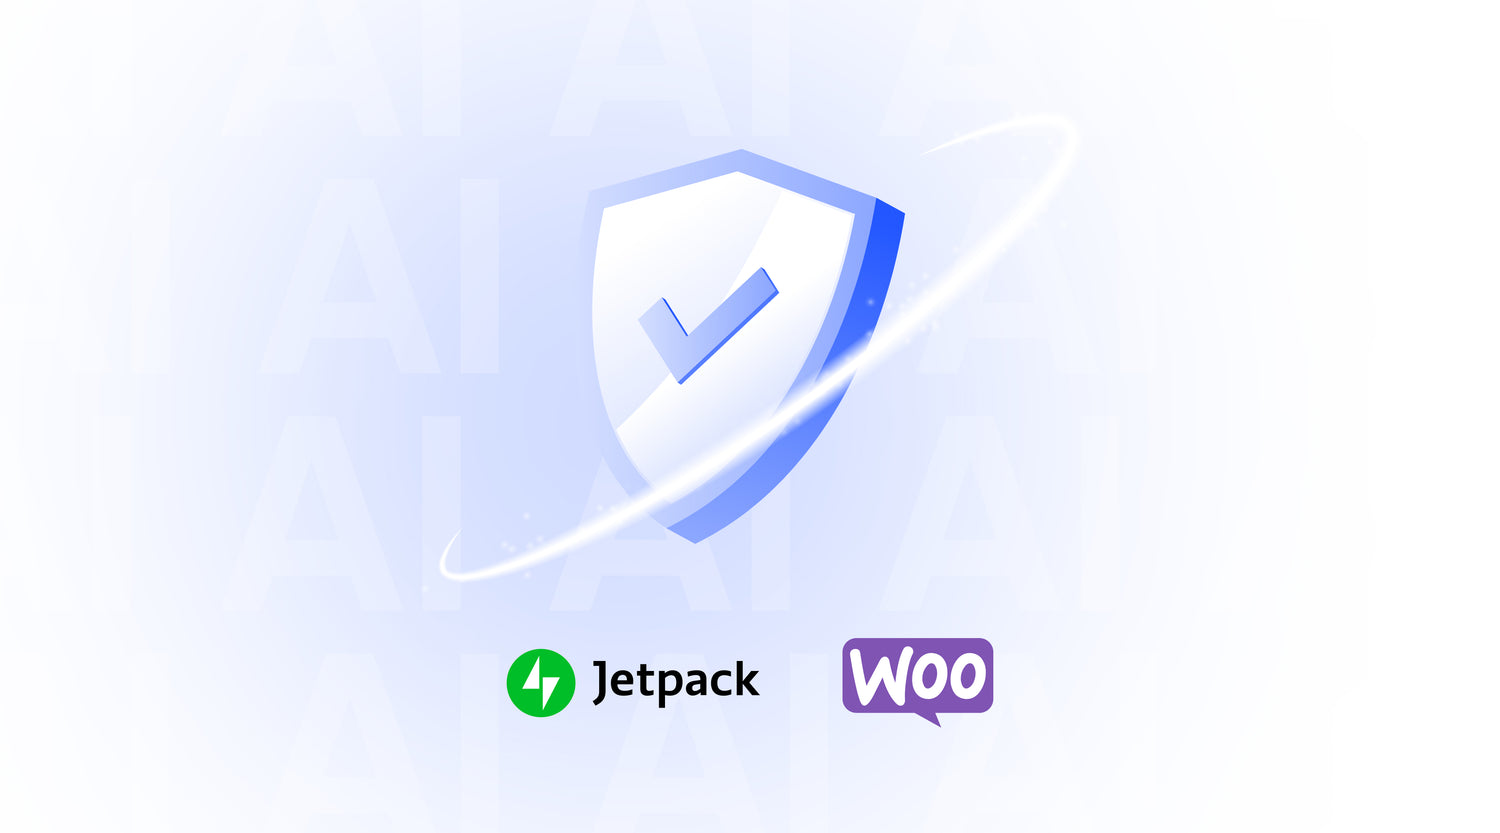 Ensuring security and protection: the critical update for Jetpack and WooCommerce